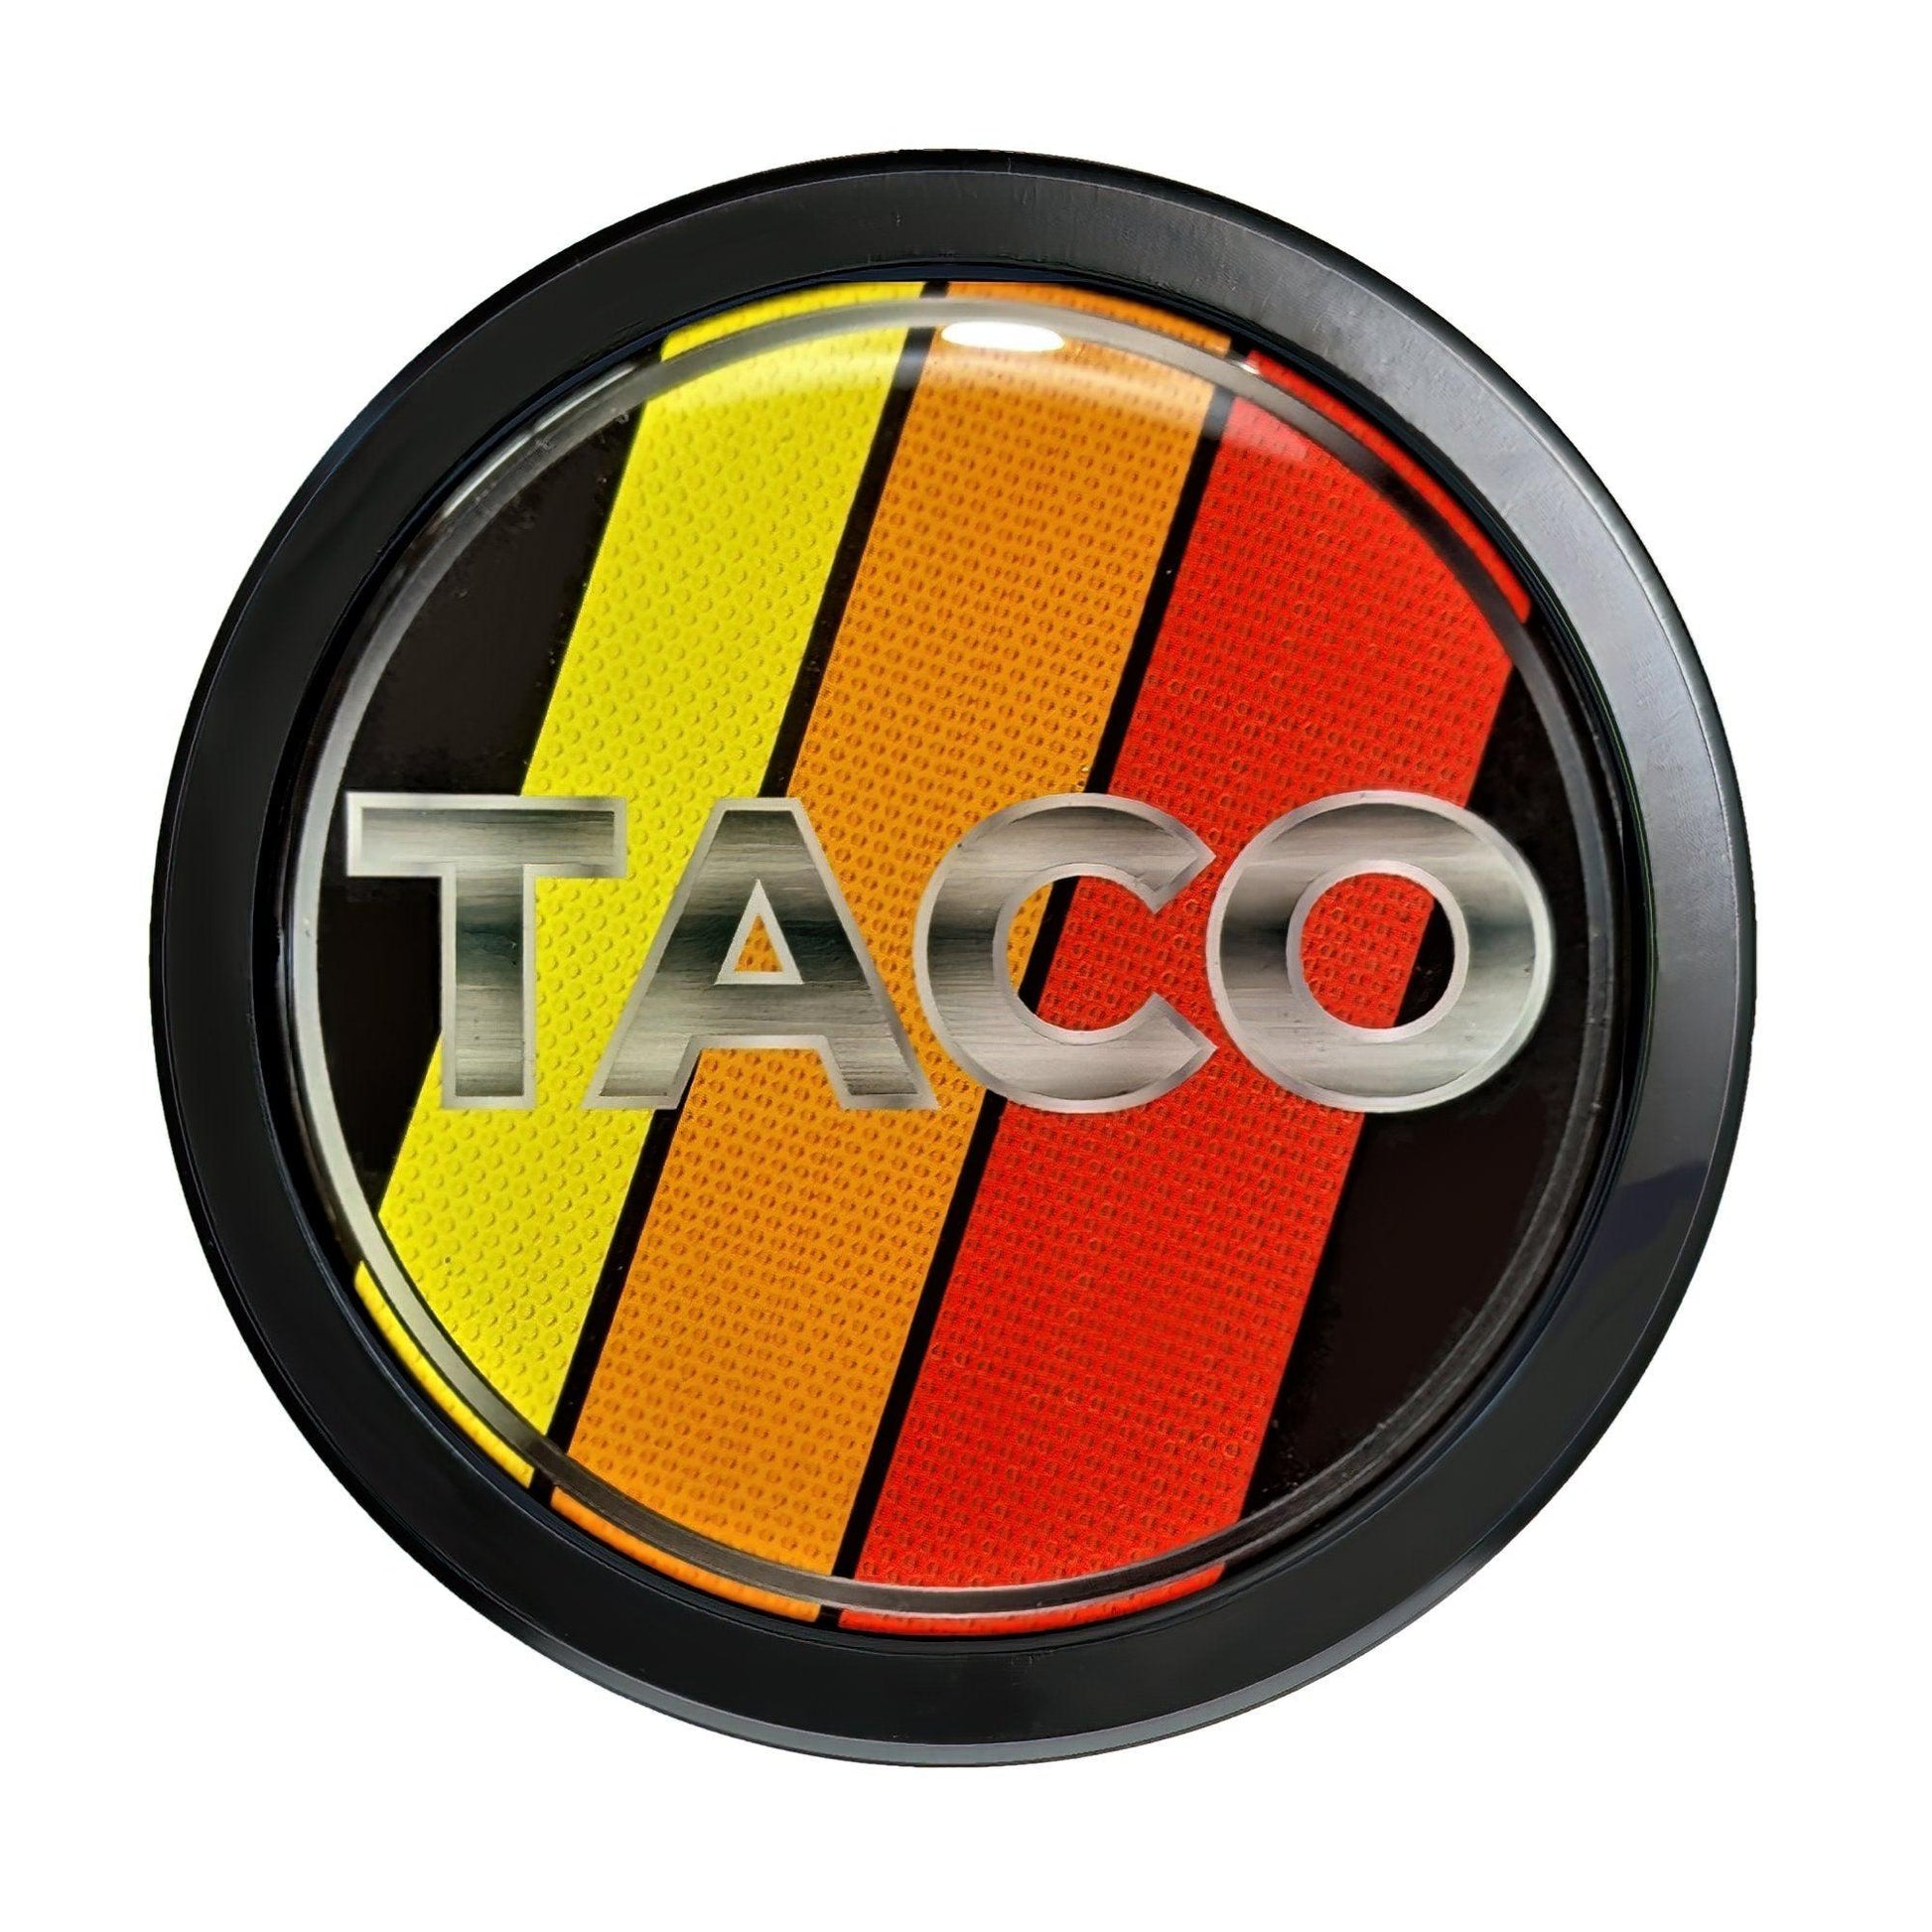 Tri-badge emblem Tacoma - Standard Grille Badge , not cheap, not vinyl, quality aluminum and resin.